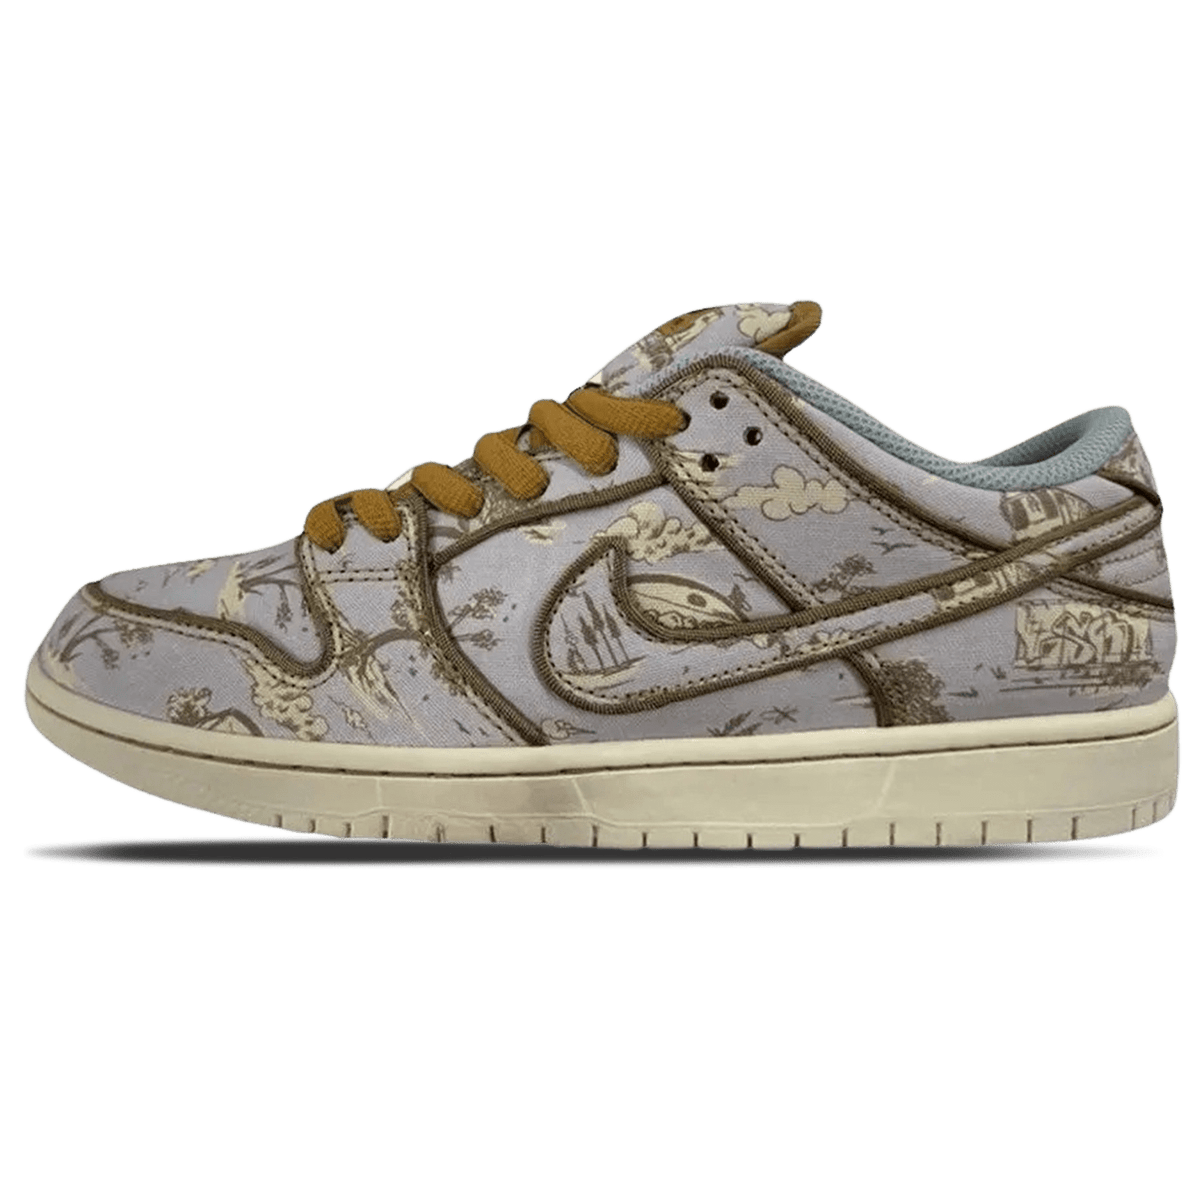 Nike Dunk SB Low 'City of Style Pack' - Kick Game